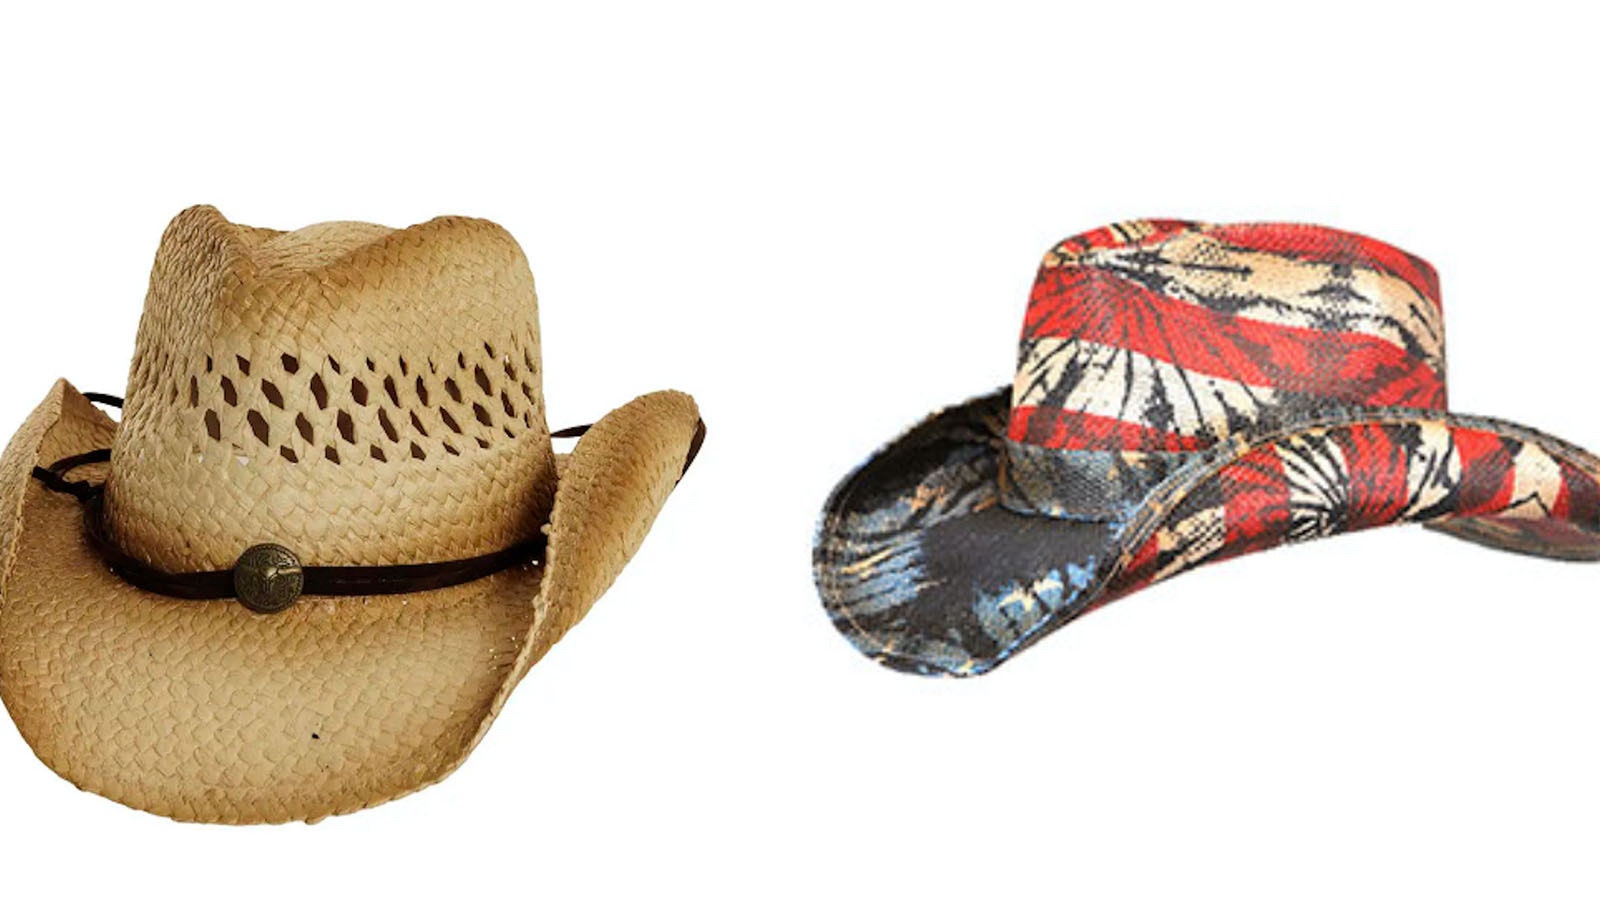 At left, typical straw hat found at most tourist shops. At right, also not a cowboy hat.